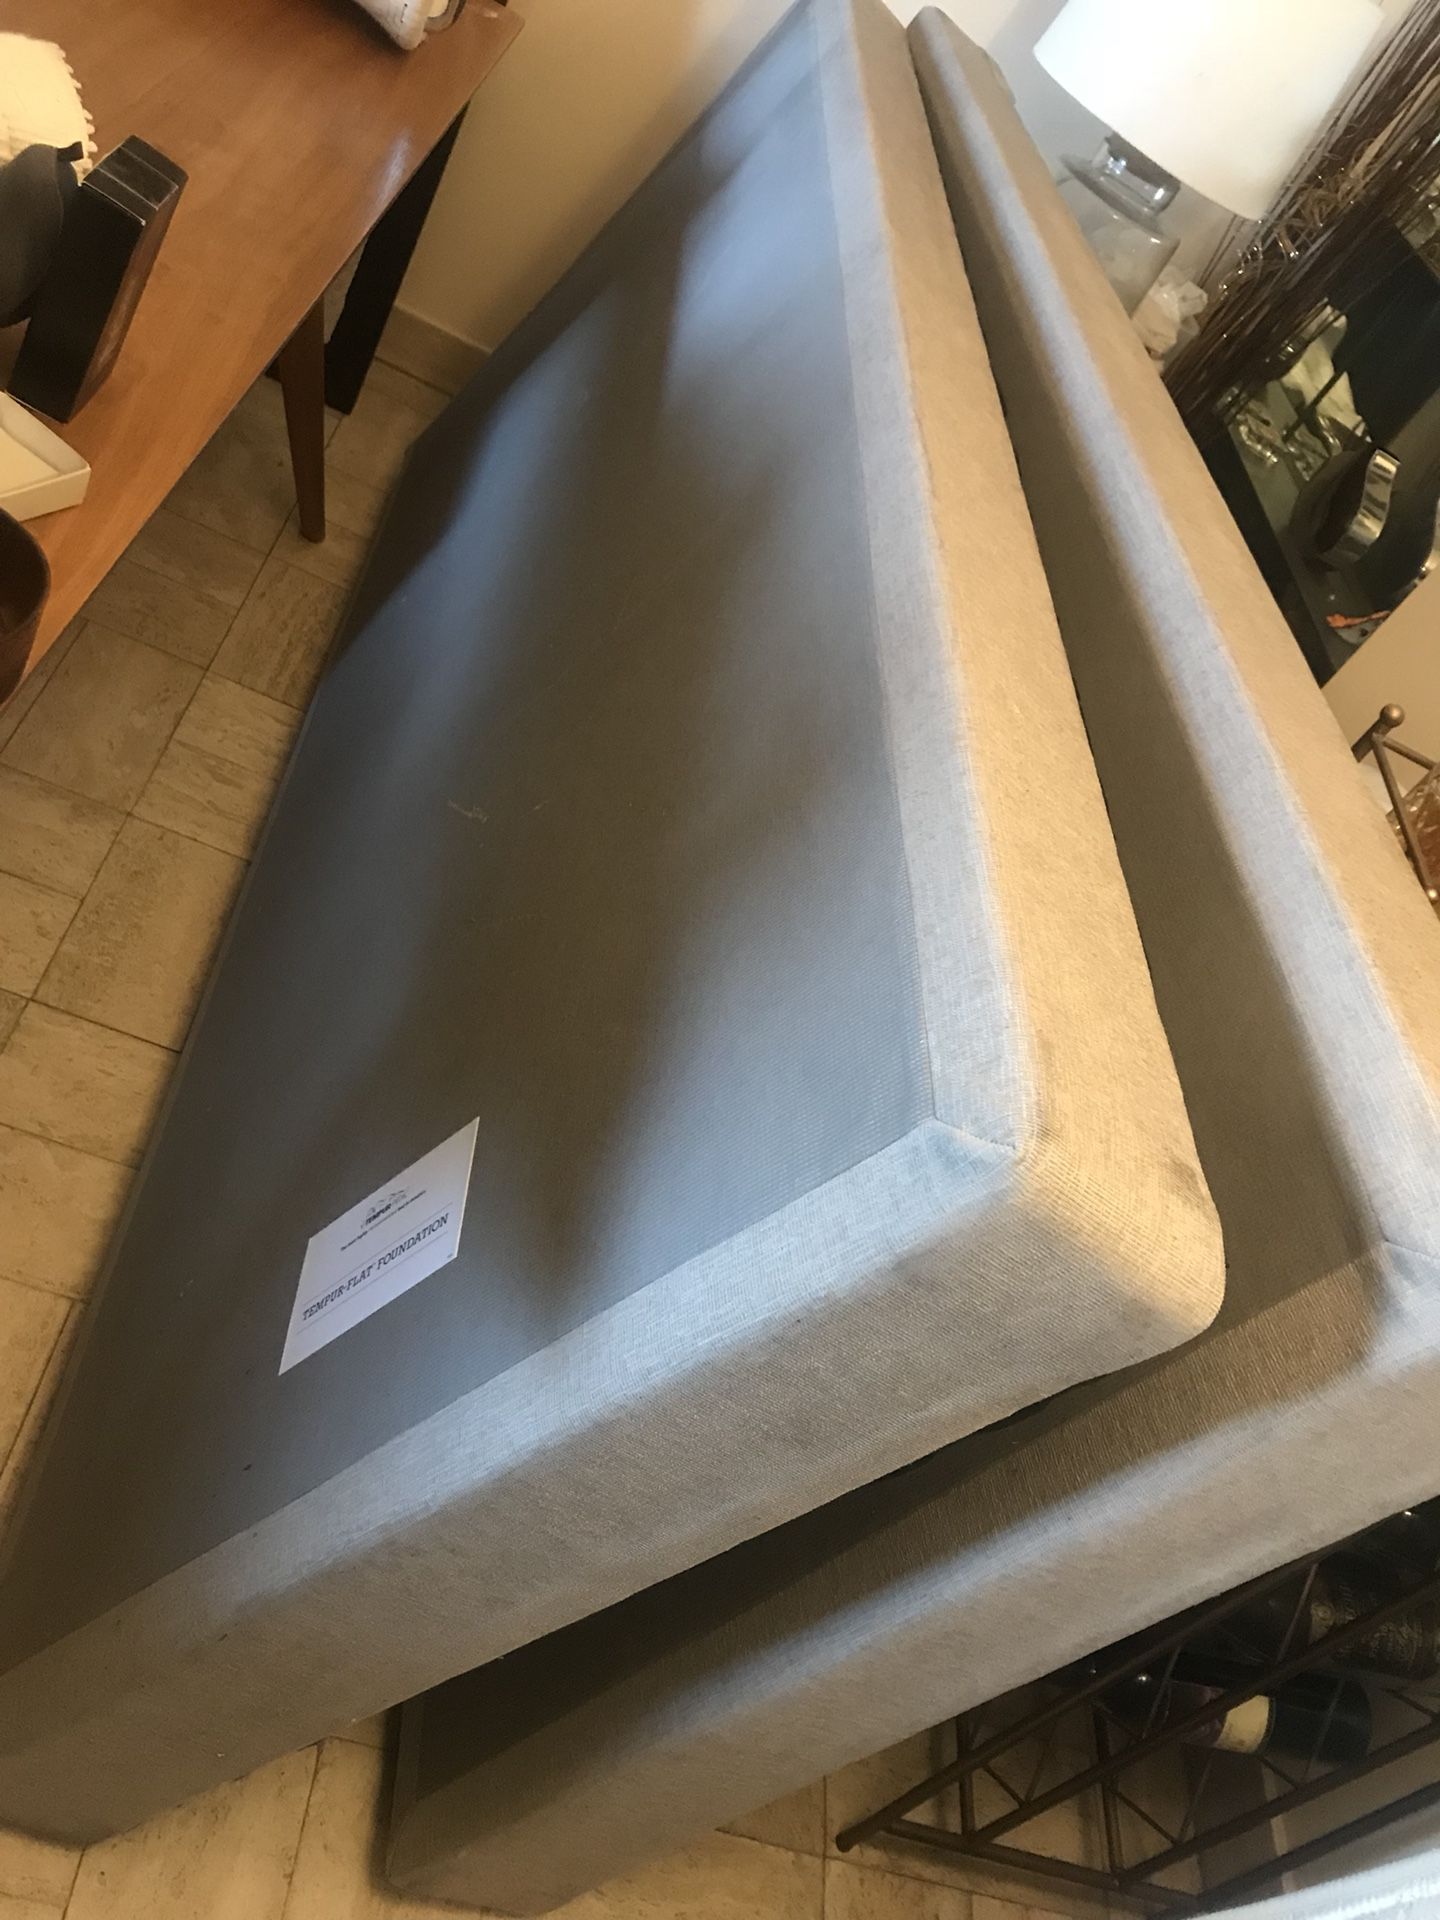 King size “Tempurpedic” brand box spring in excellent condition for $125. Delivery is included in the price